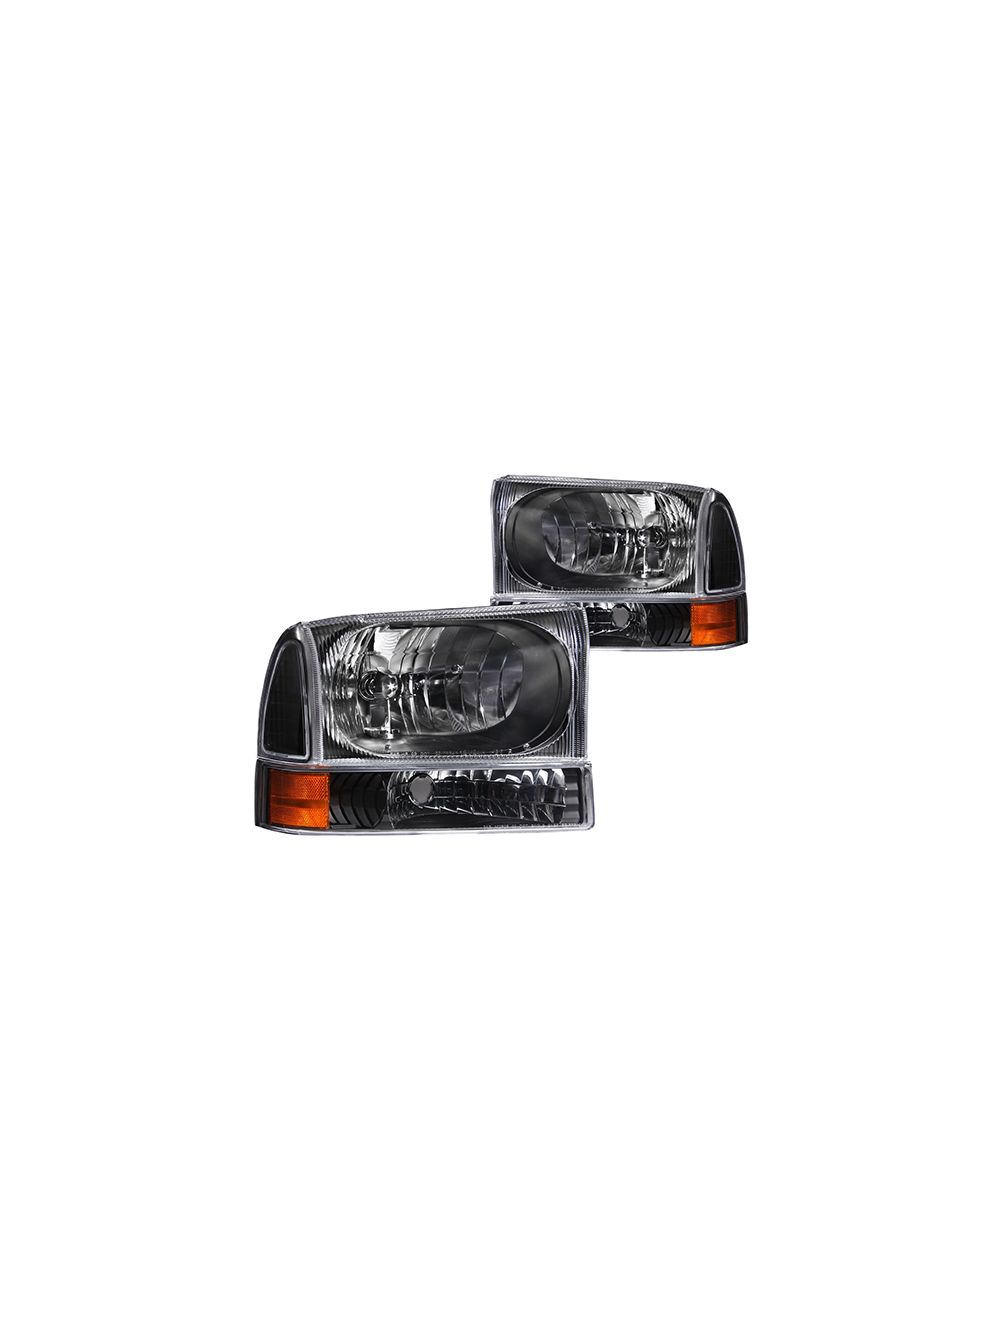 Anzo ANZ111080 Black with Amber Corner Headlights for Ford 1999 - 2004 Super Duty & 2000 - 2004 Excursion